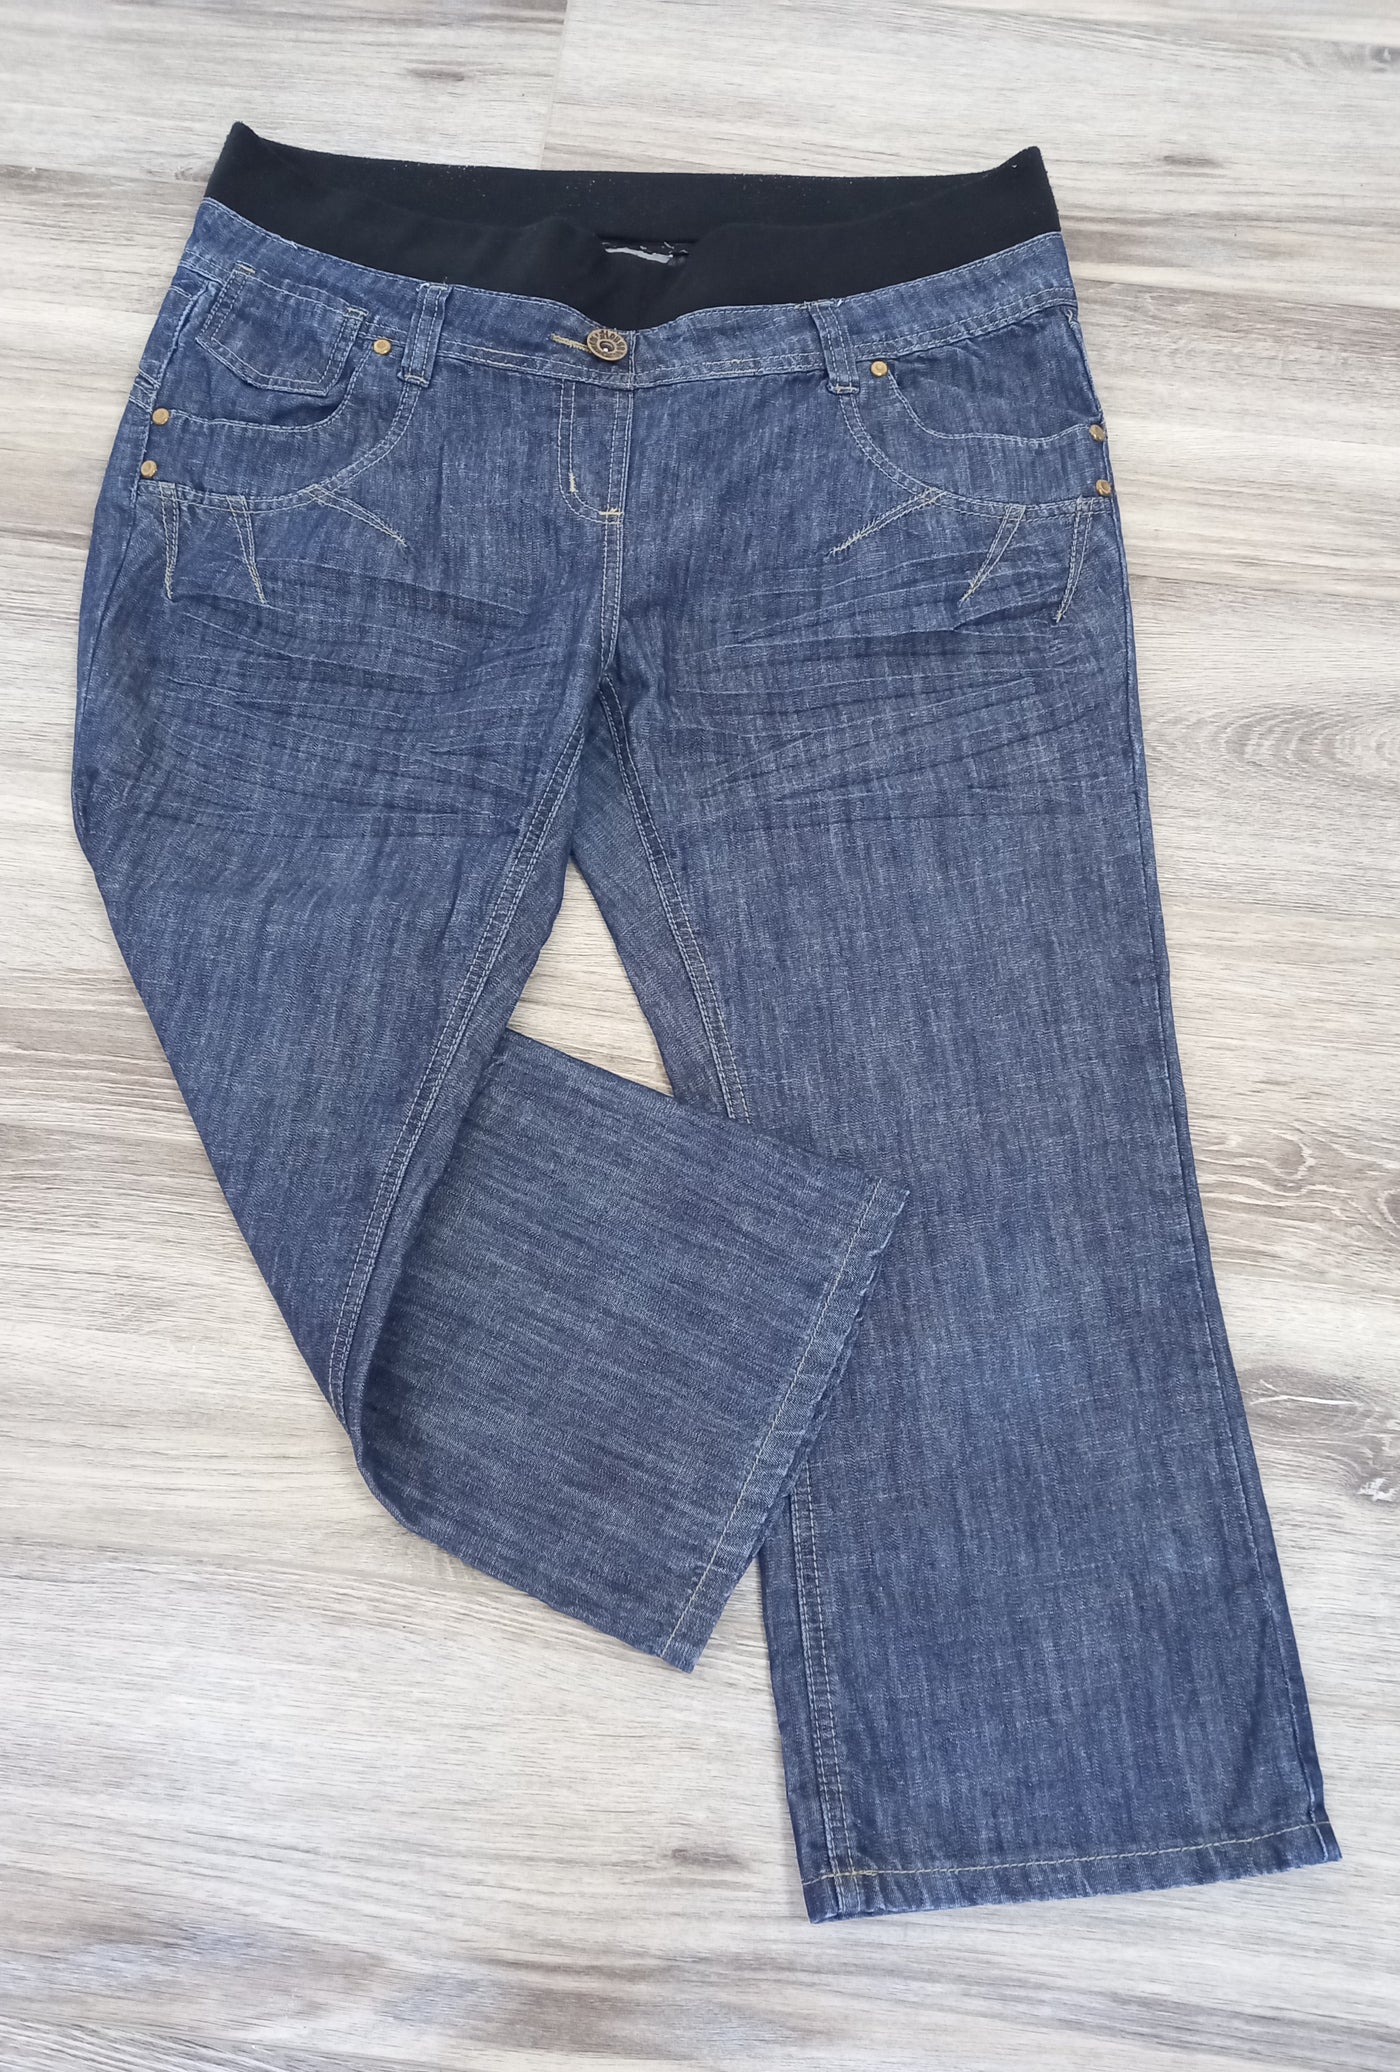 New Look Maternity Blue Crop Jeans - Size 12